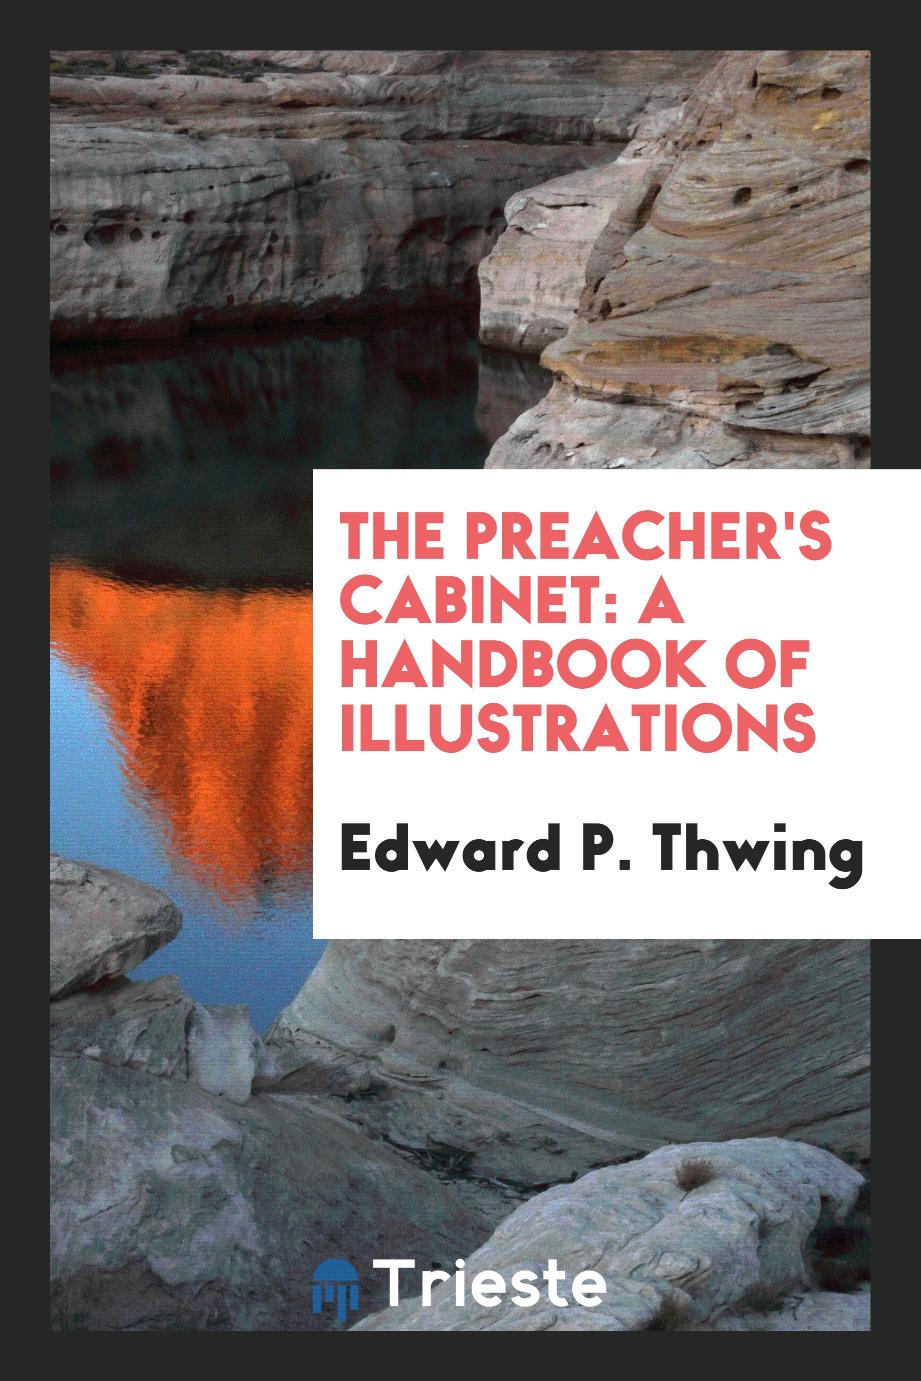 The preacher's cabinet: a handbook of illustrations